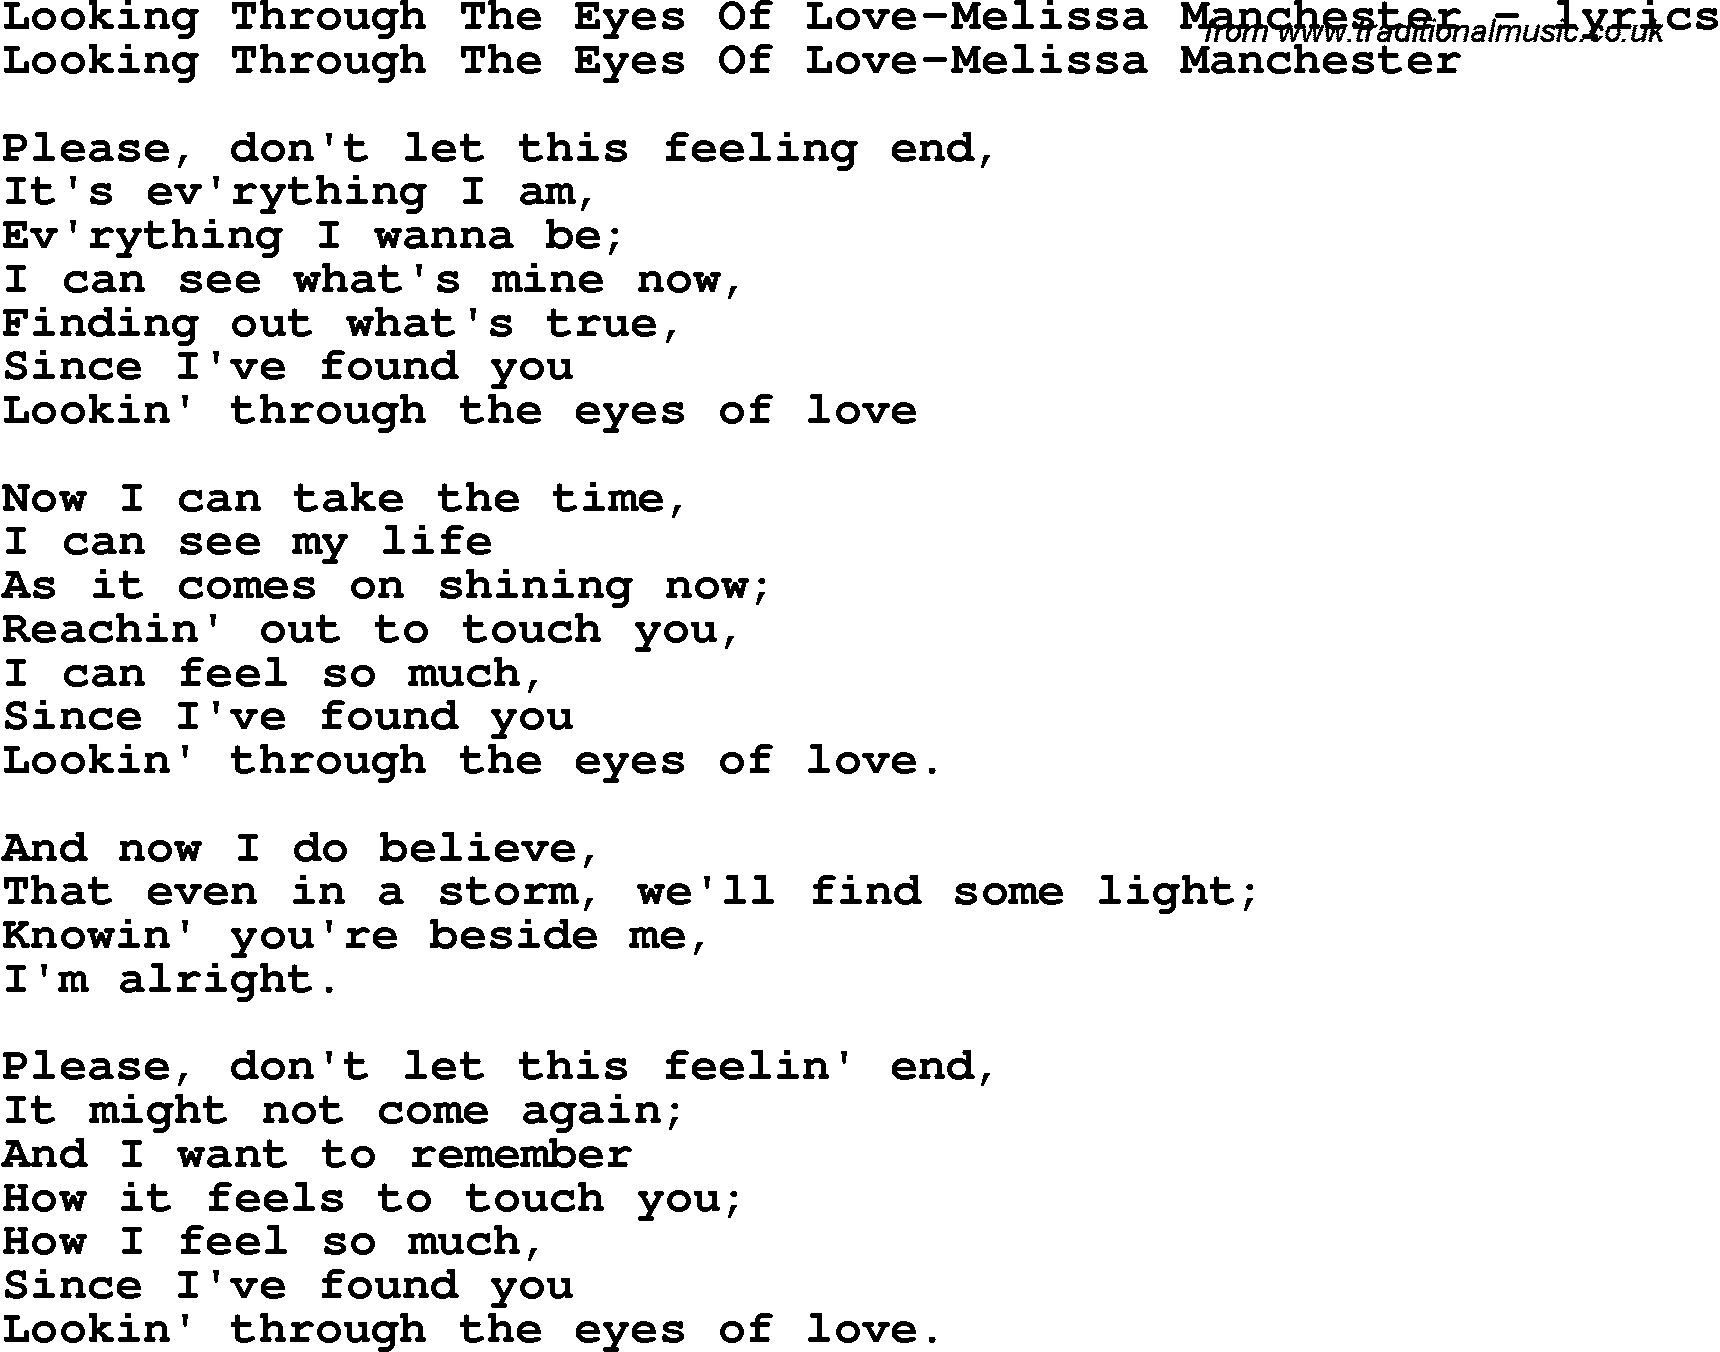 Love Song Lyrics for: Looking Through The Eyes Of Love-Melissa Manchester